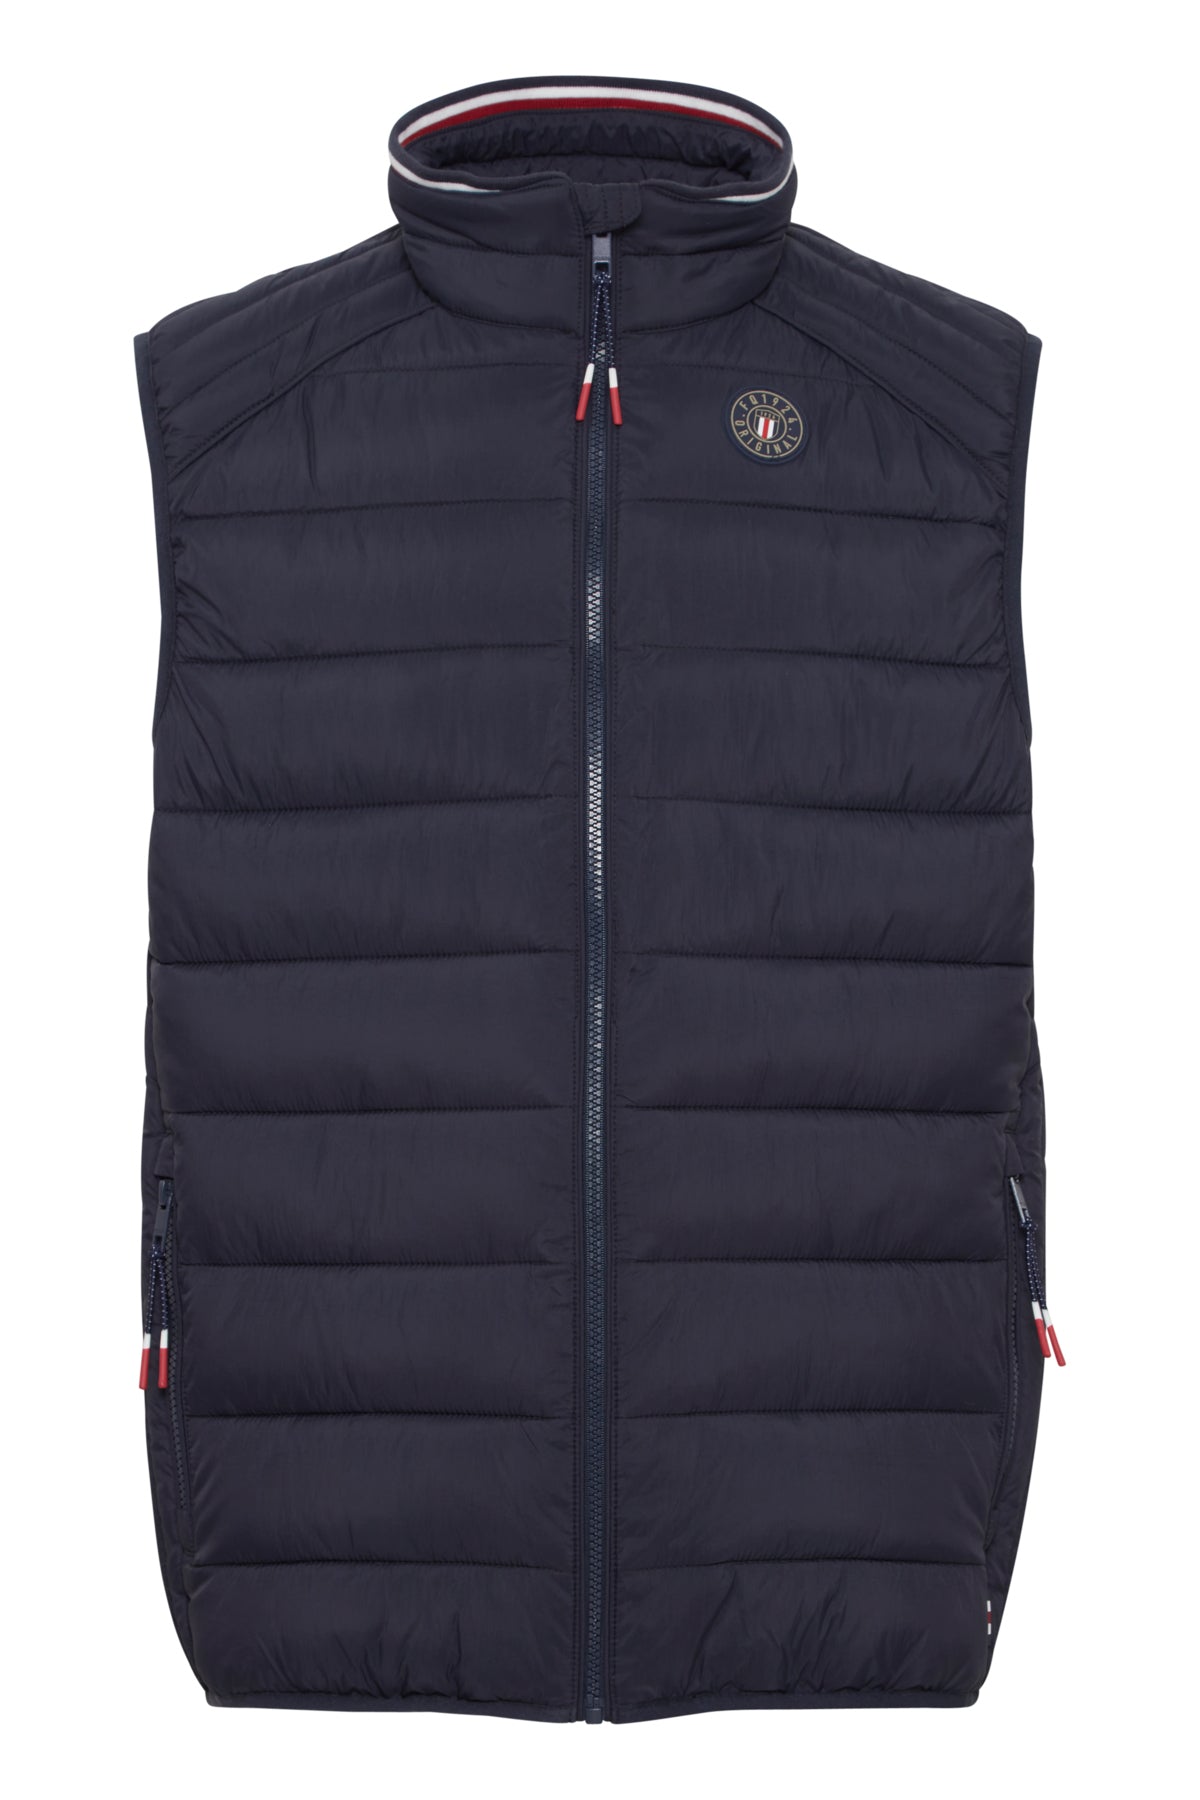 FQVinncent Padded Waistcoat